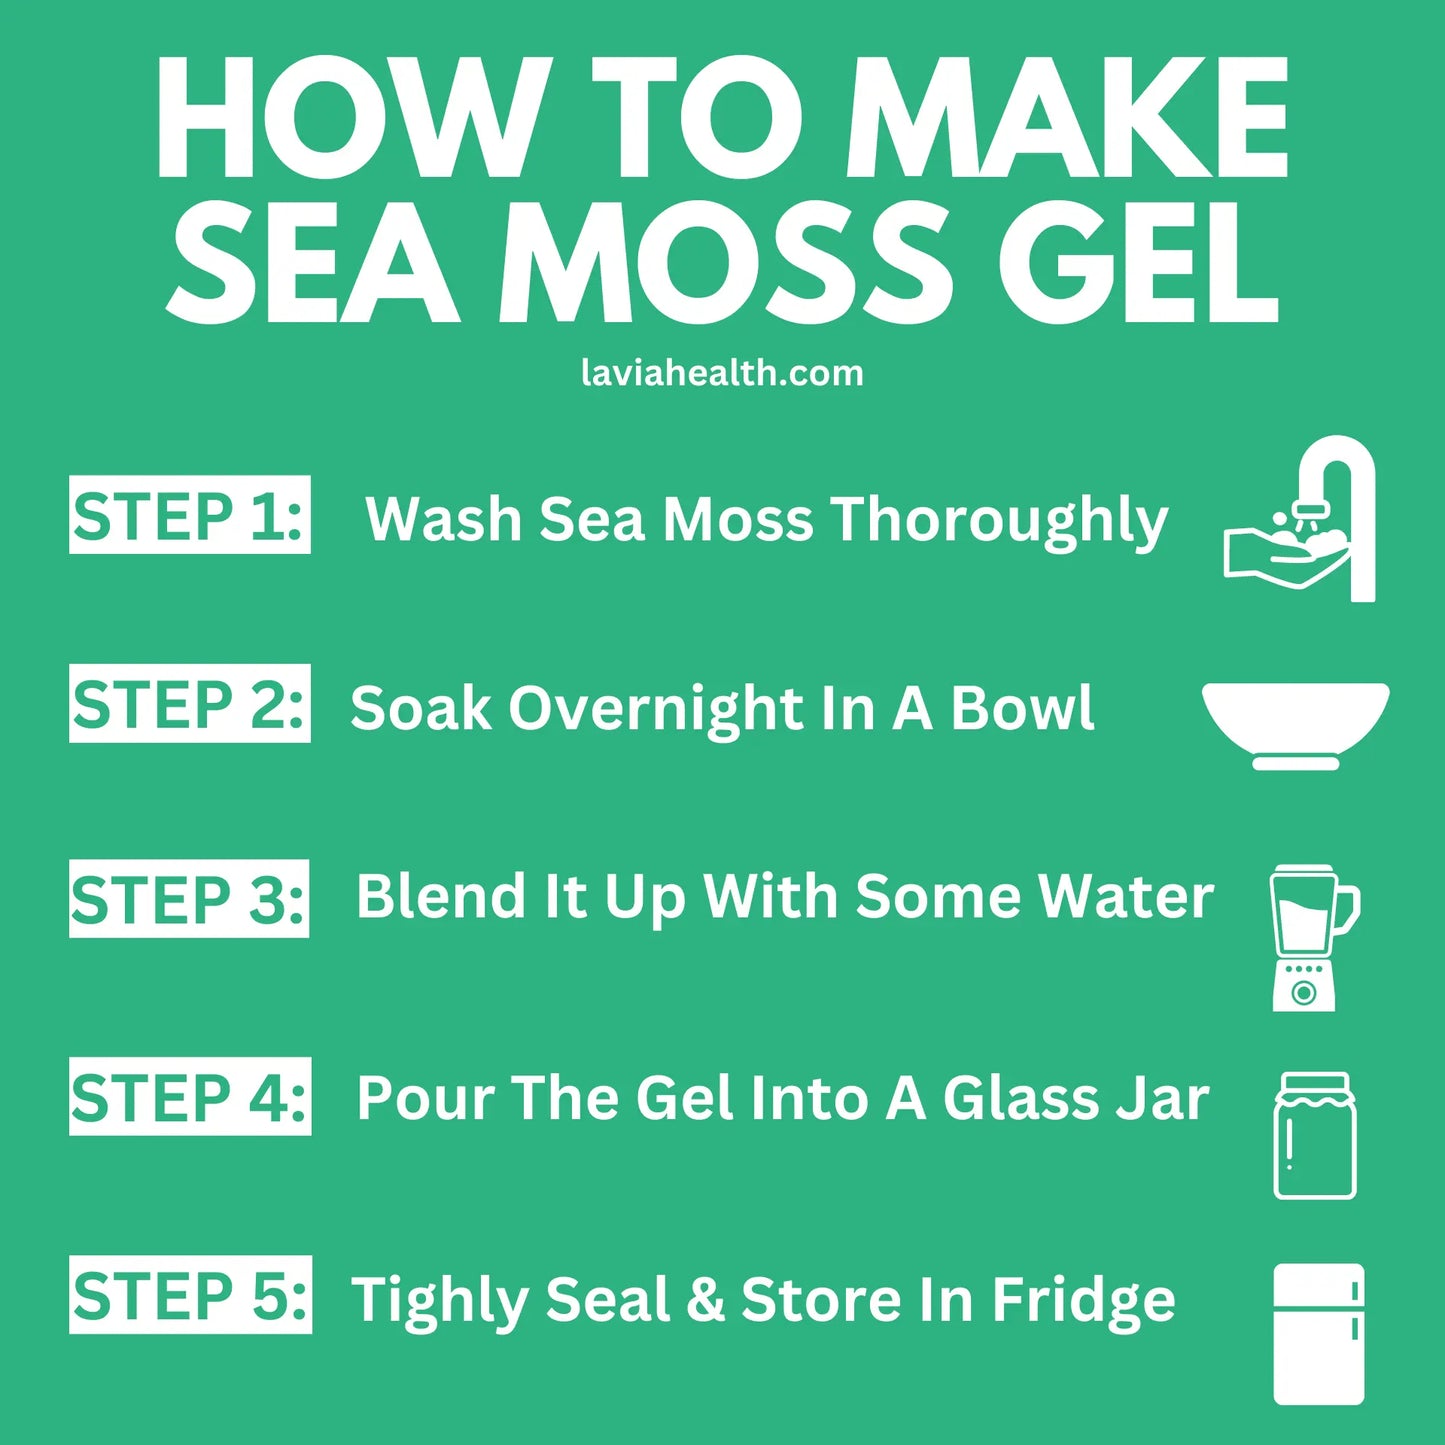 HOW TO MAKE SEA MOSS GEL: STEP 1: Wash Sea Moss Thoroughly STEP 2: Soak Overnight In A Bowl STEP 3: Blend It Up With Some Water STEP 4: Pour The Gel Into A Glass Jar STEP 5: Tightly Seal & Store In Fridge (Lavia Health Organic Sea Moss)